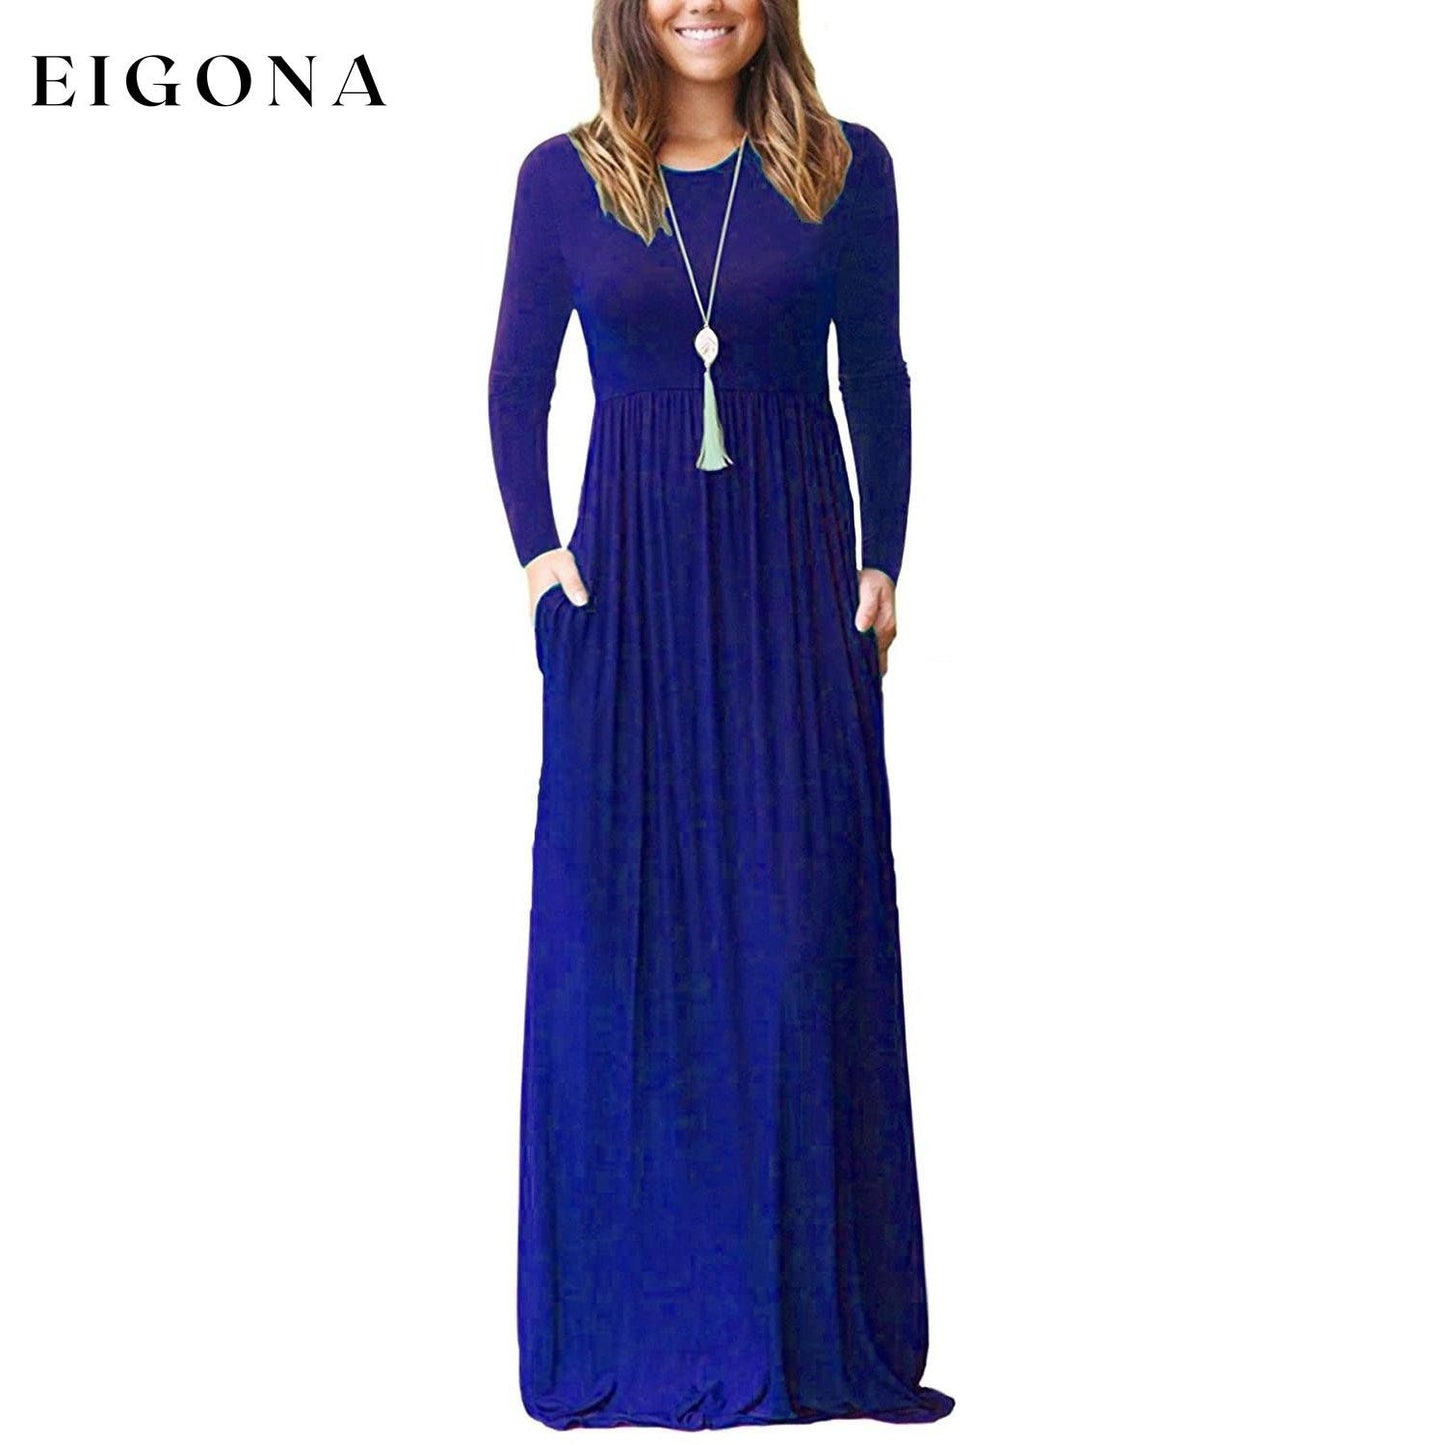 Women Long Sleeve Loose Plain Maxi Dresses Casual Long Dresses with Pockets Royal Blue __stock:500 casual dresses clothes dresses refund_fee:1200 show-color-swatches